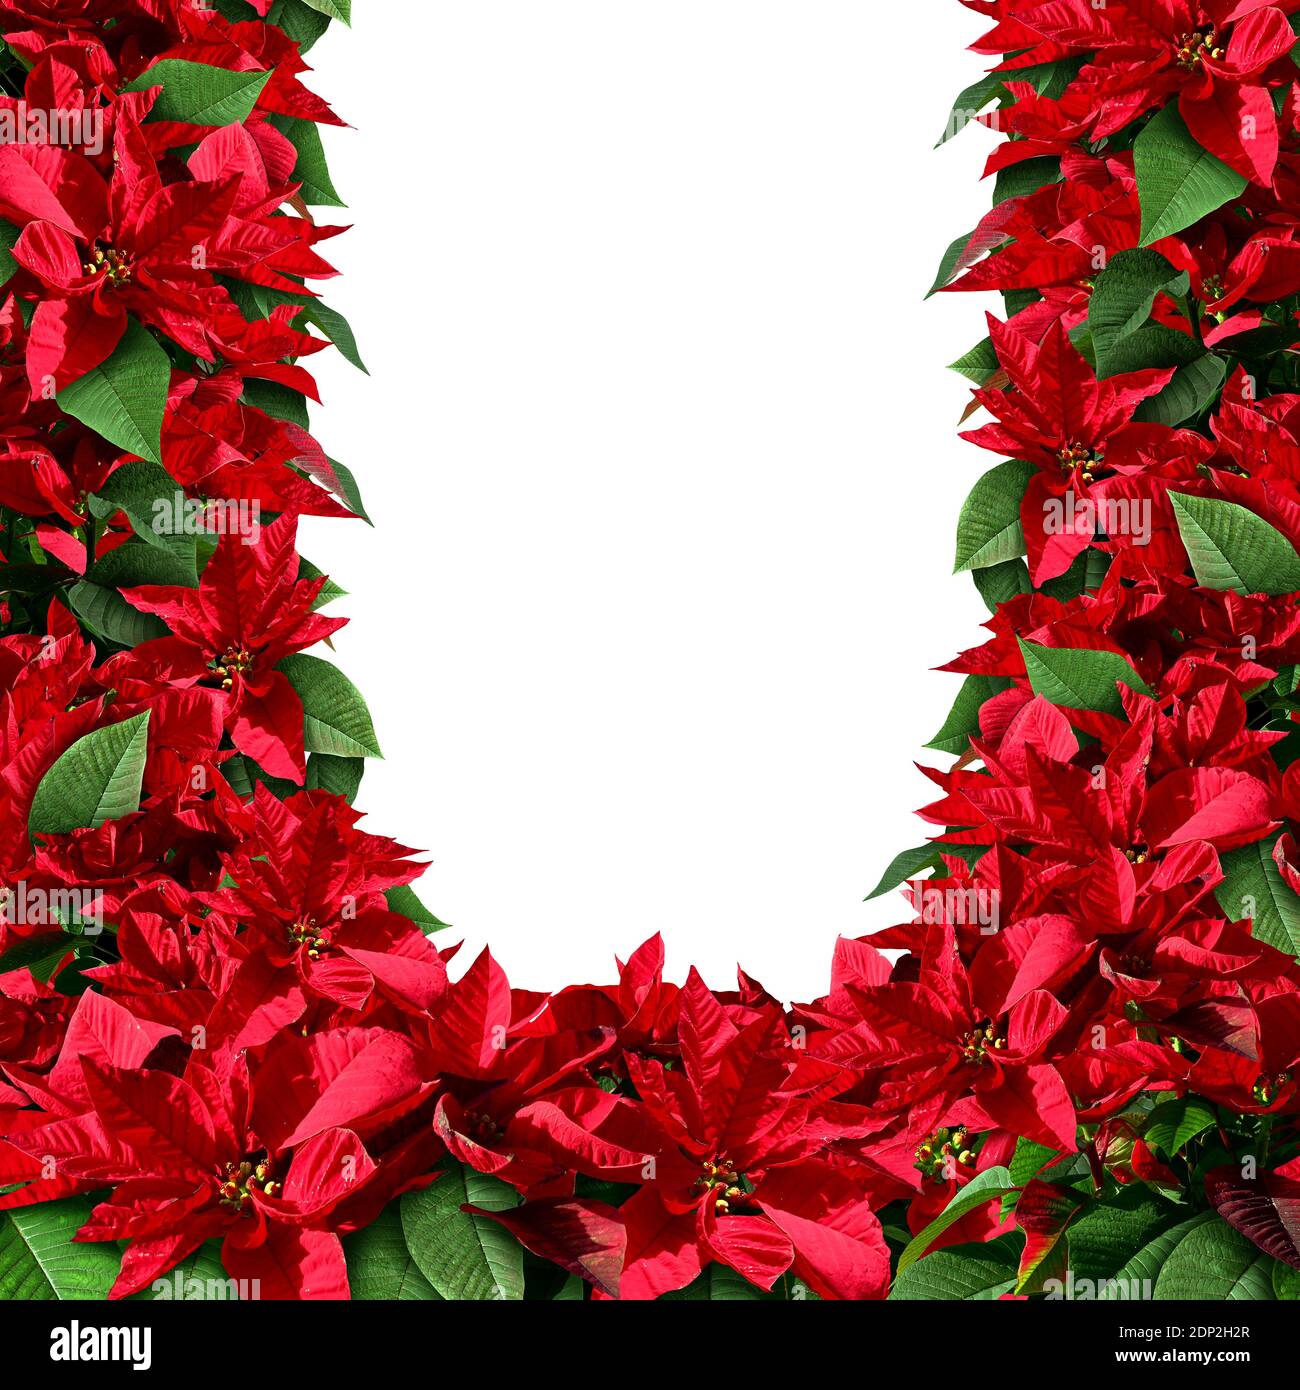 Poinsetta as a blank frame and border design as Christmas foliage element with floral plants from central america and Mexico representing. Stock Photo